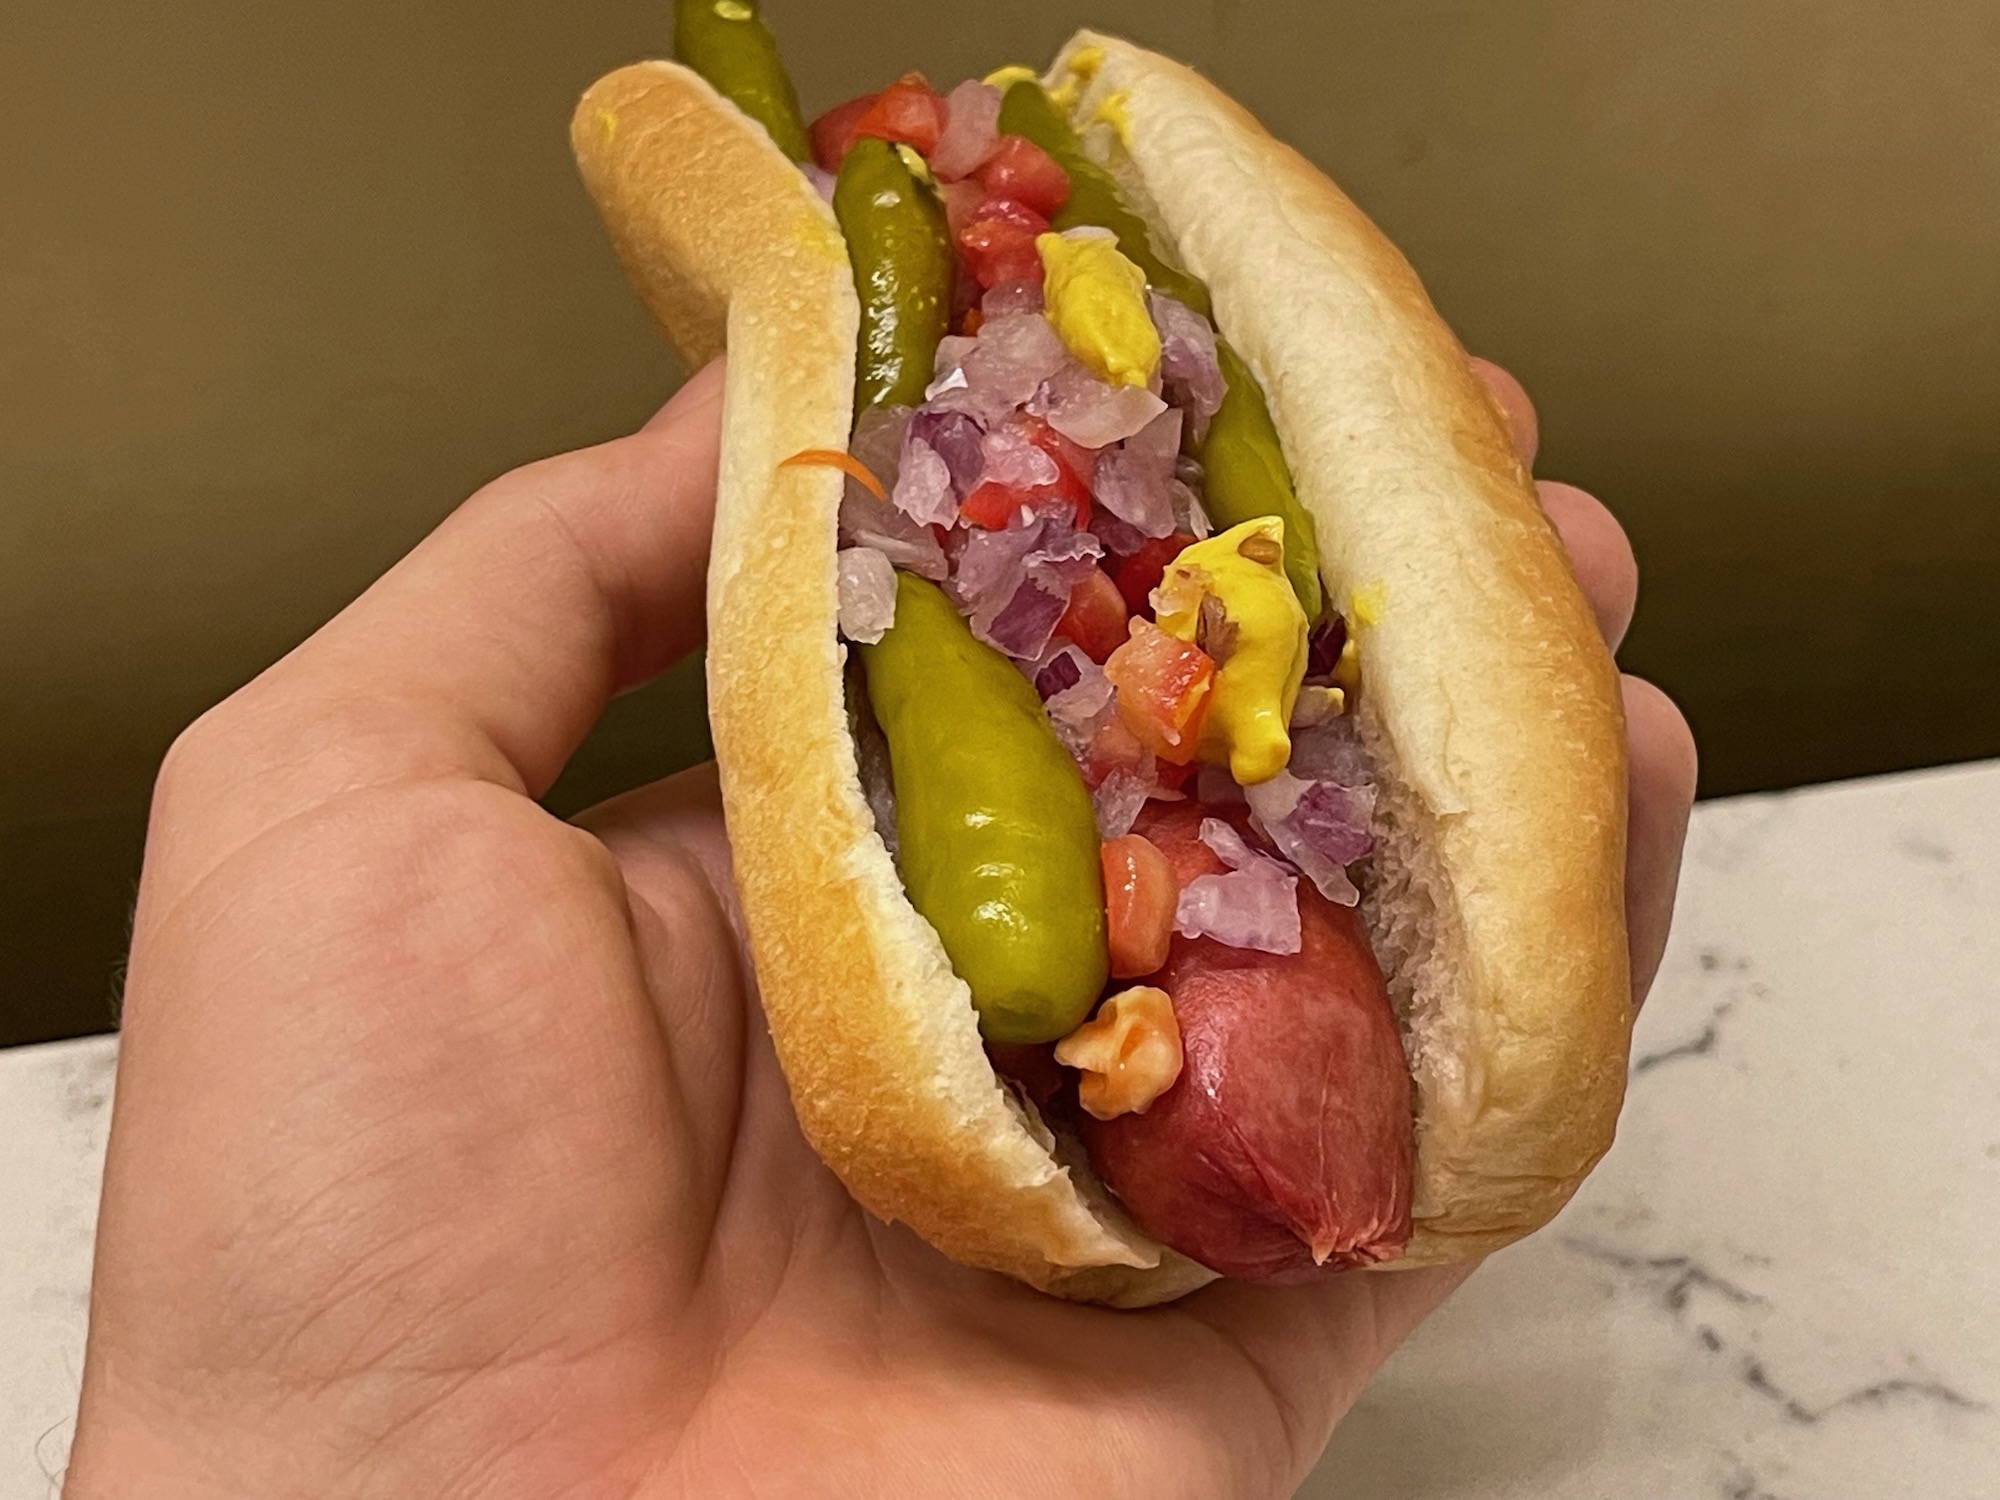 a hand holding a hot dog with various toppings